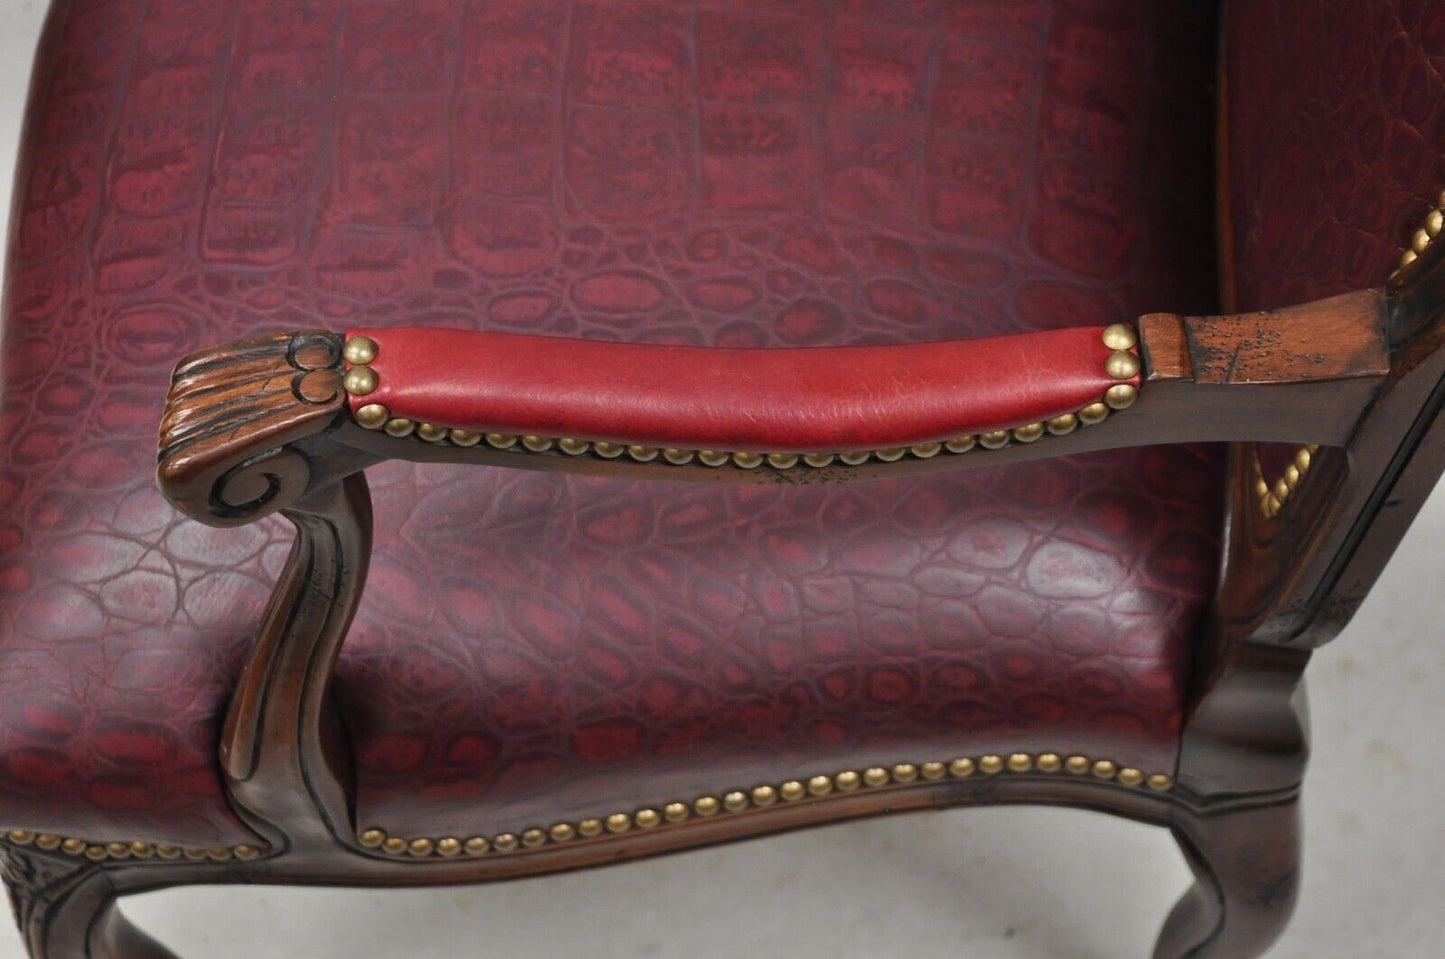 French Country Louis XV Style Burgundy Leather Faux Reptile Cowhide Armchair